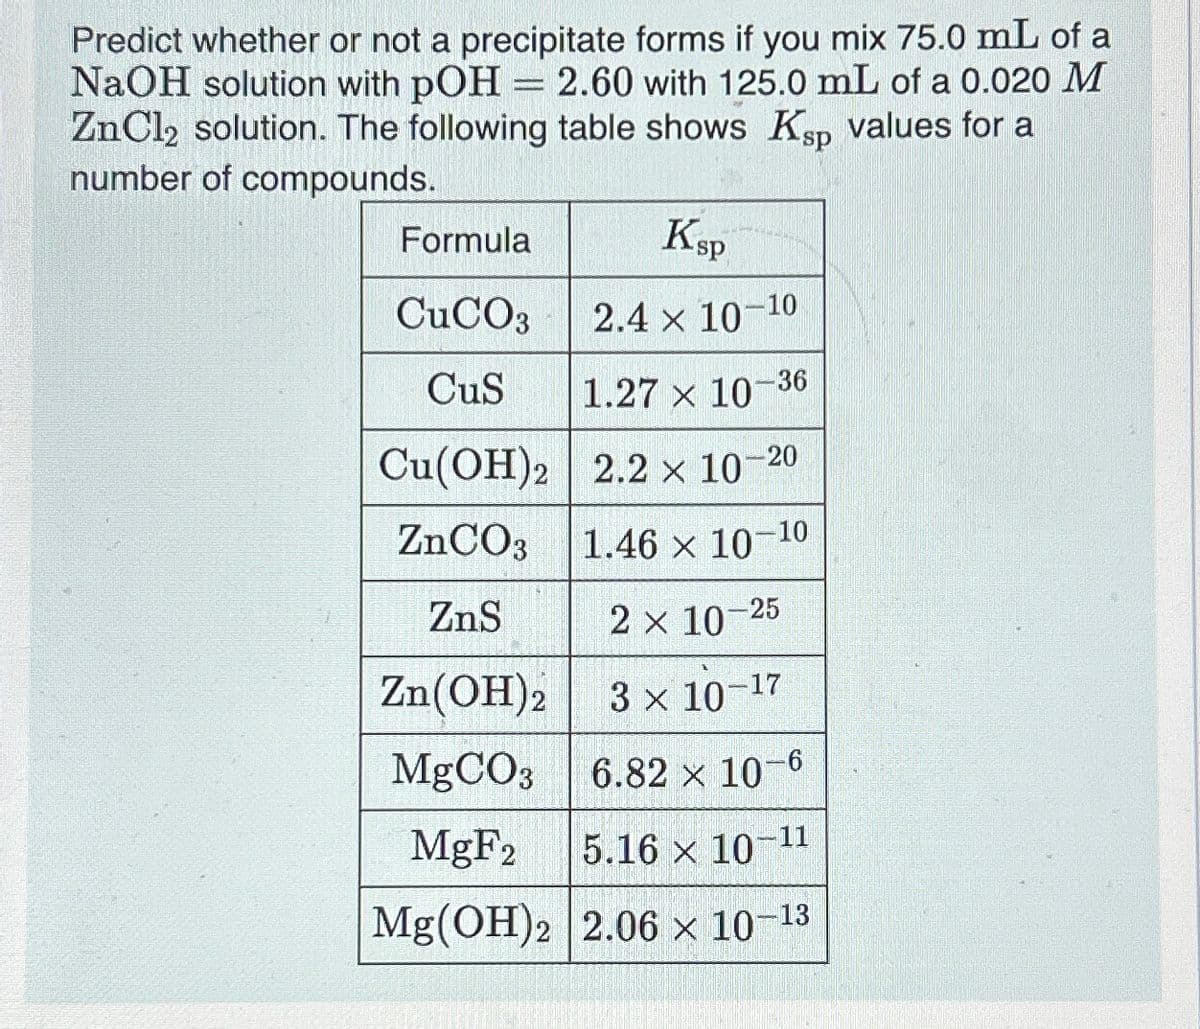 Predict whether or not a precipitate forms if you mix 75.0 mL of a
NaOH solution with pOH = 2.60 with 125.0 mL of a 0.020 M
ZnCl2 solution. The following table shows Ksp values for a
number of compounds.
Formula
Ksp
CuCO3
2.4 x 10-10
CuS
1.27 x 10-36
Cu(OH)2 2.2 × 10-20
ZnCO3 1.46 x 10-10
ZnS
2 x 10-25
Zn(OH)2
3 x 10-17
MgCO3
6.82 × 10-6
MgF2 5.16 x 10-11
Mg(OH)2 2.06 × 10-13